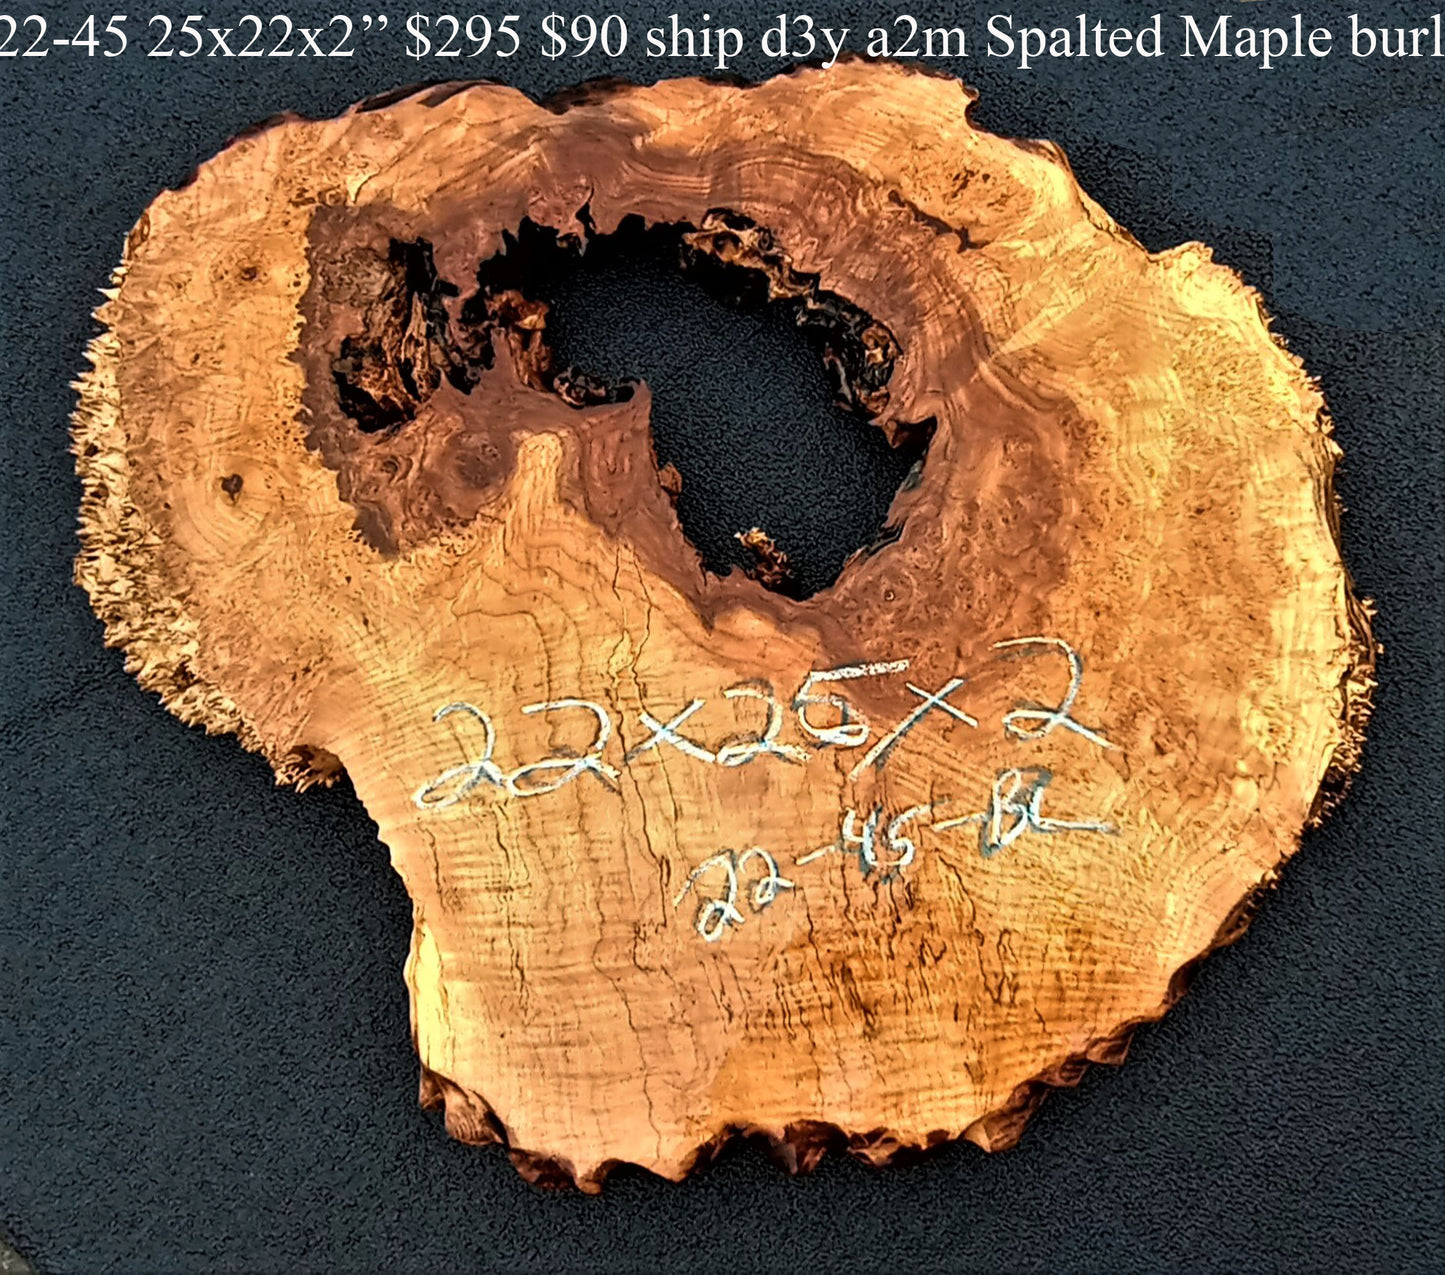 Maple burl | cookie cut | DIY crafts | River table | 22-45-bs